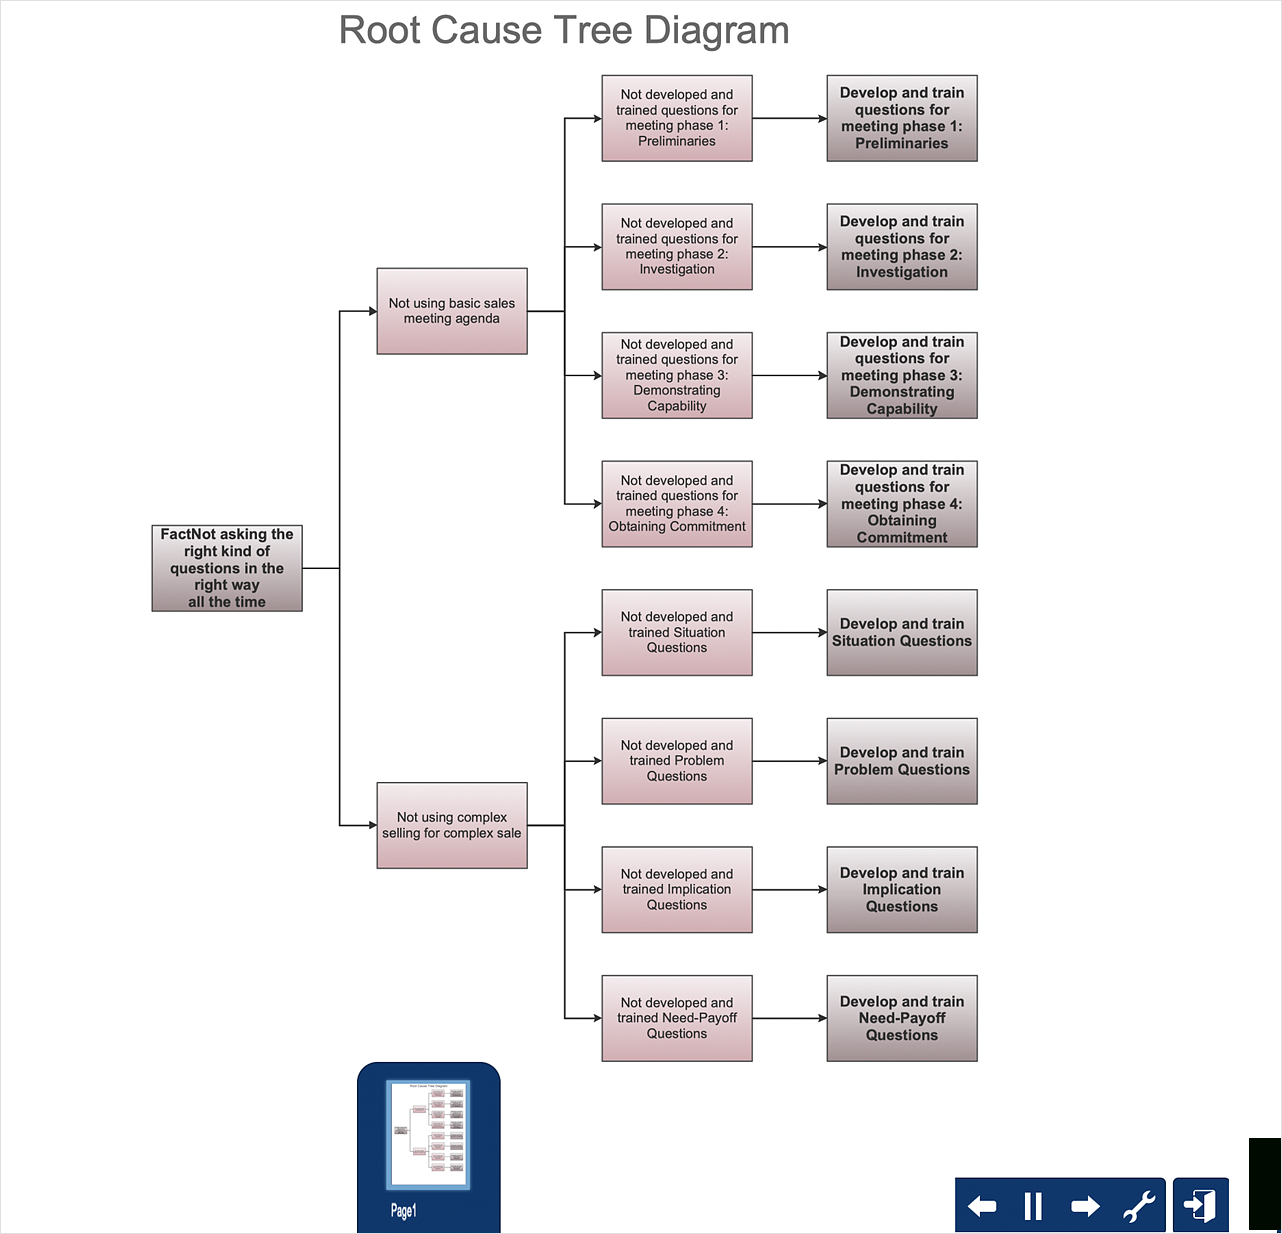 Root Cause Analysis Tree Diagram – Template | How To Create Inside Blank Tree Diagram Template